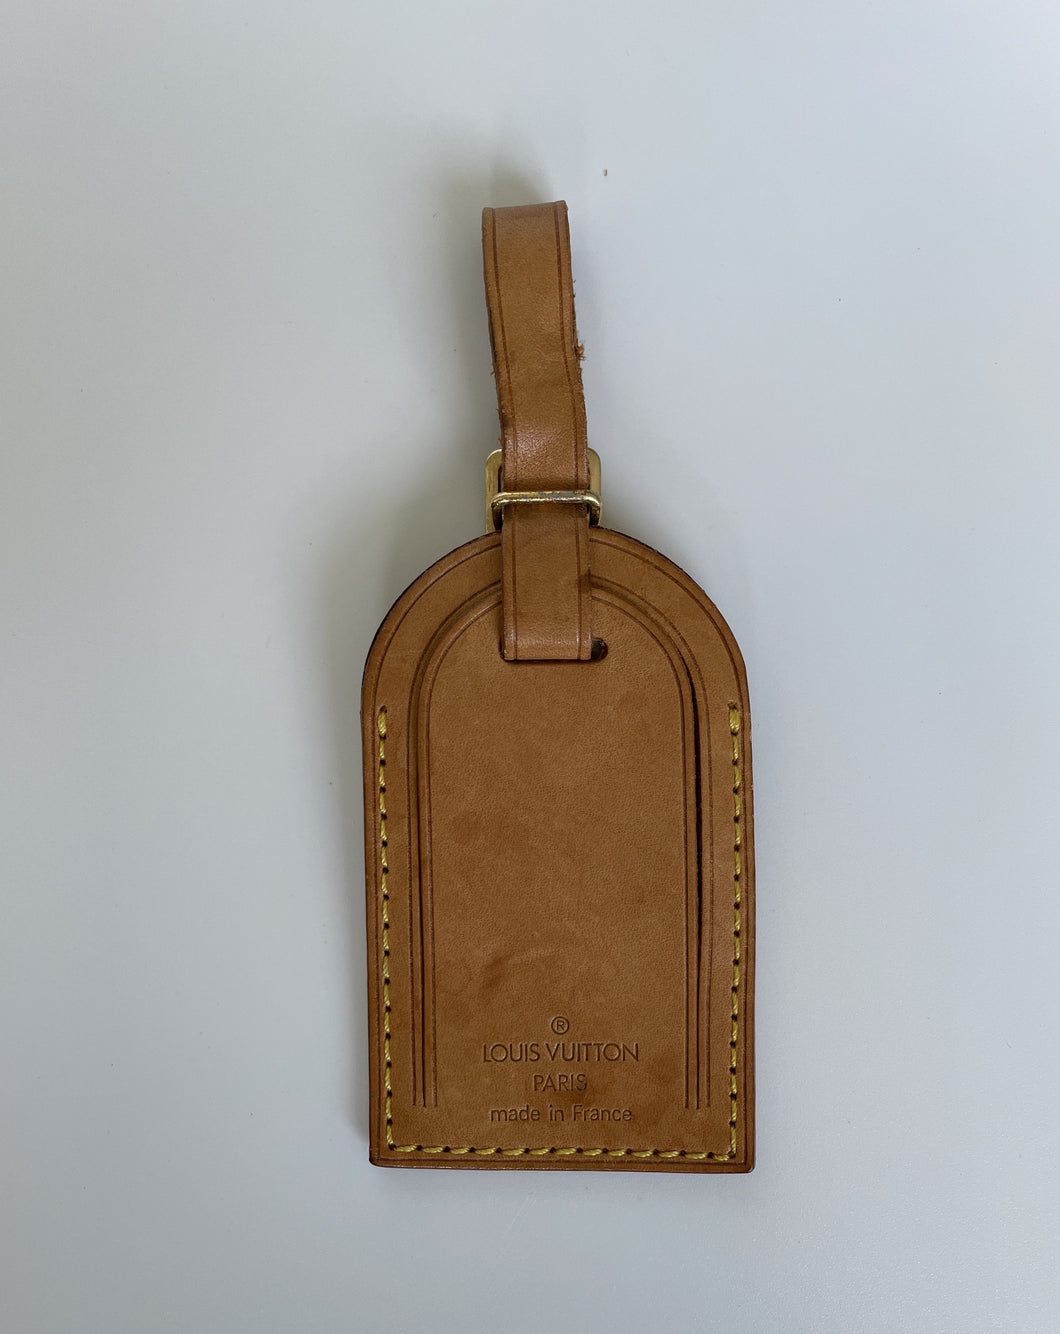 louis vuittons luggage tag